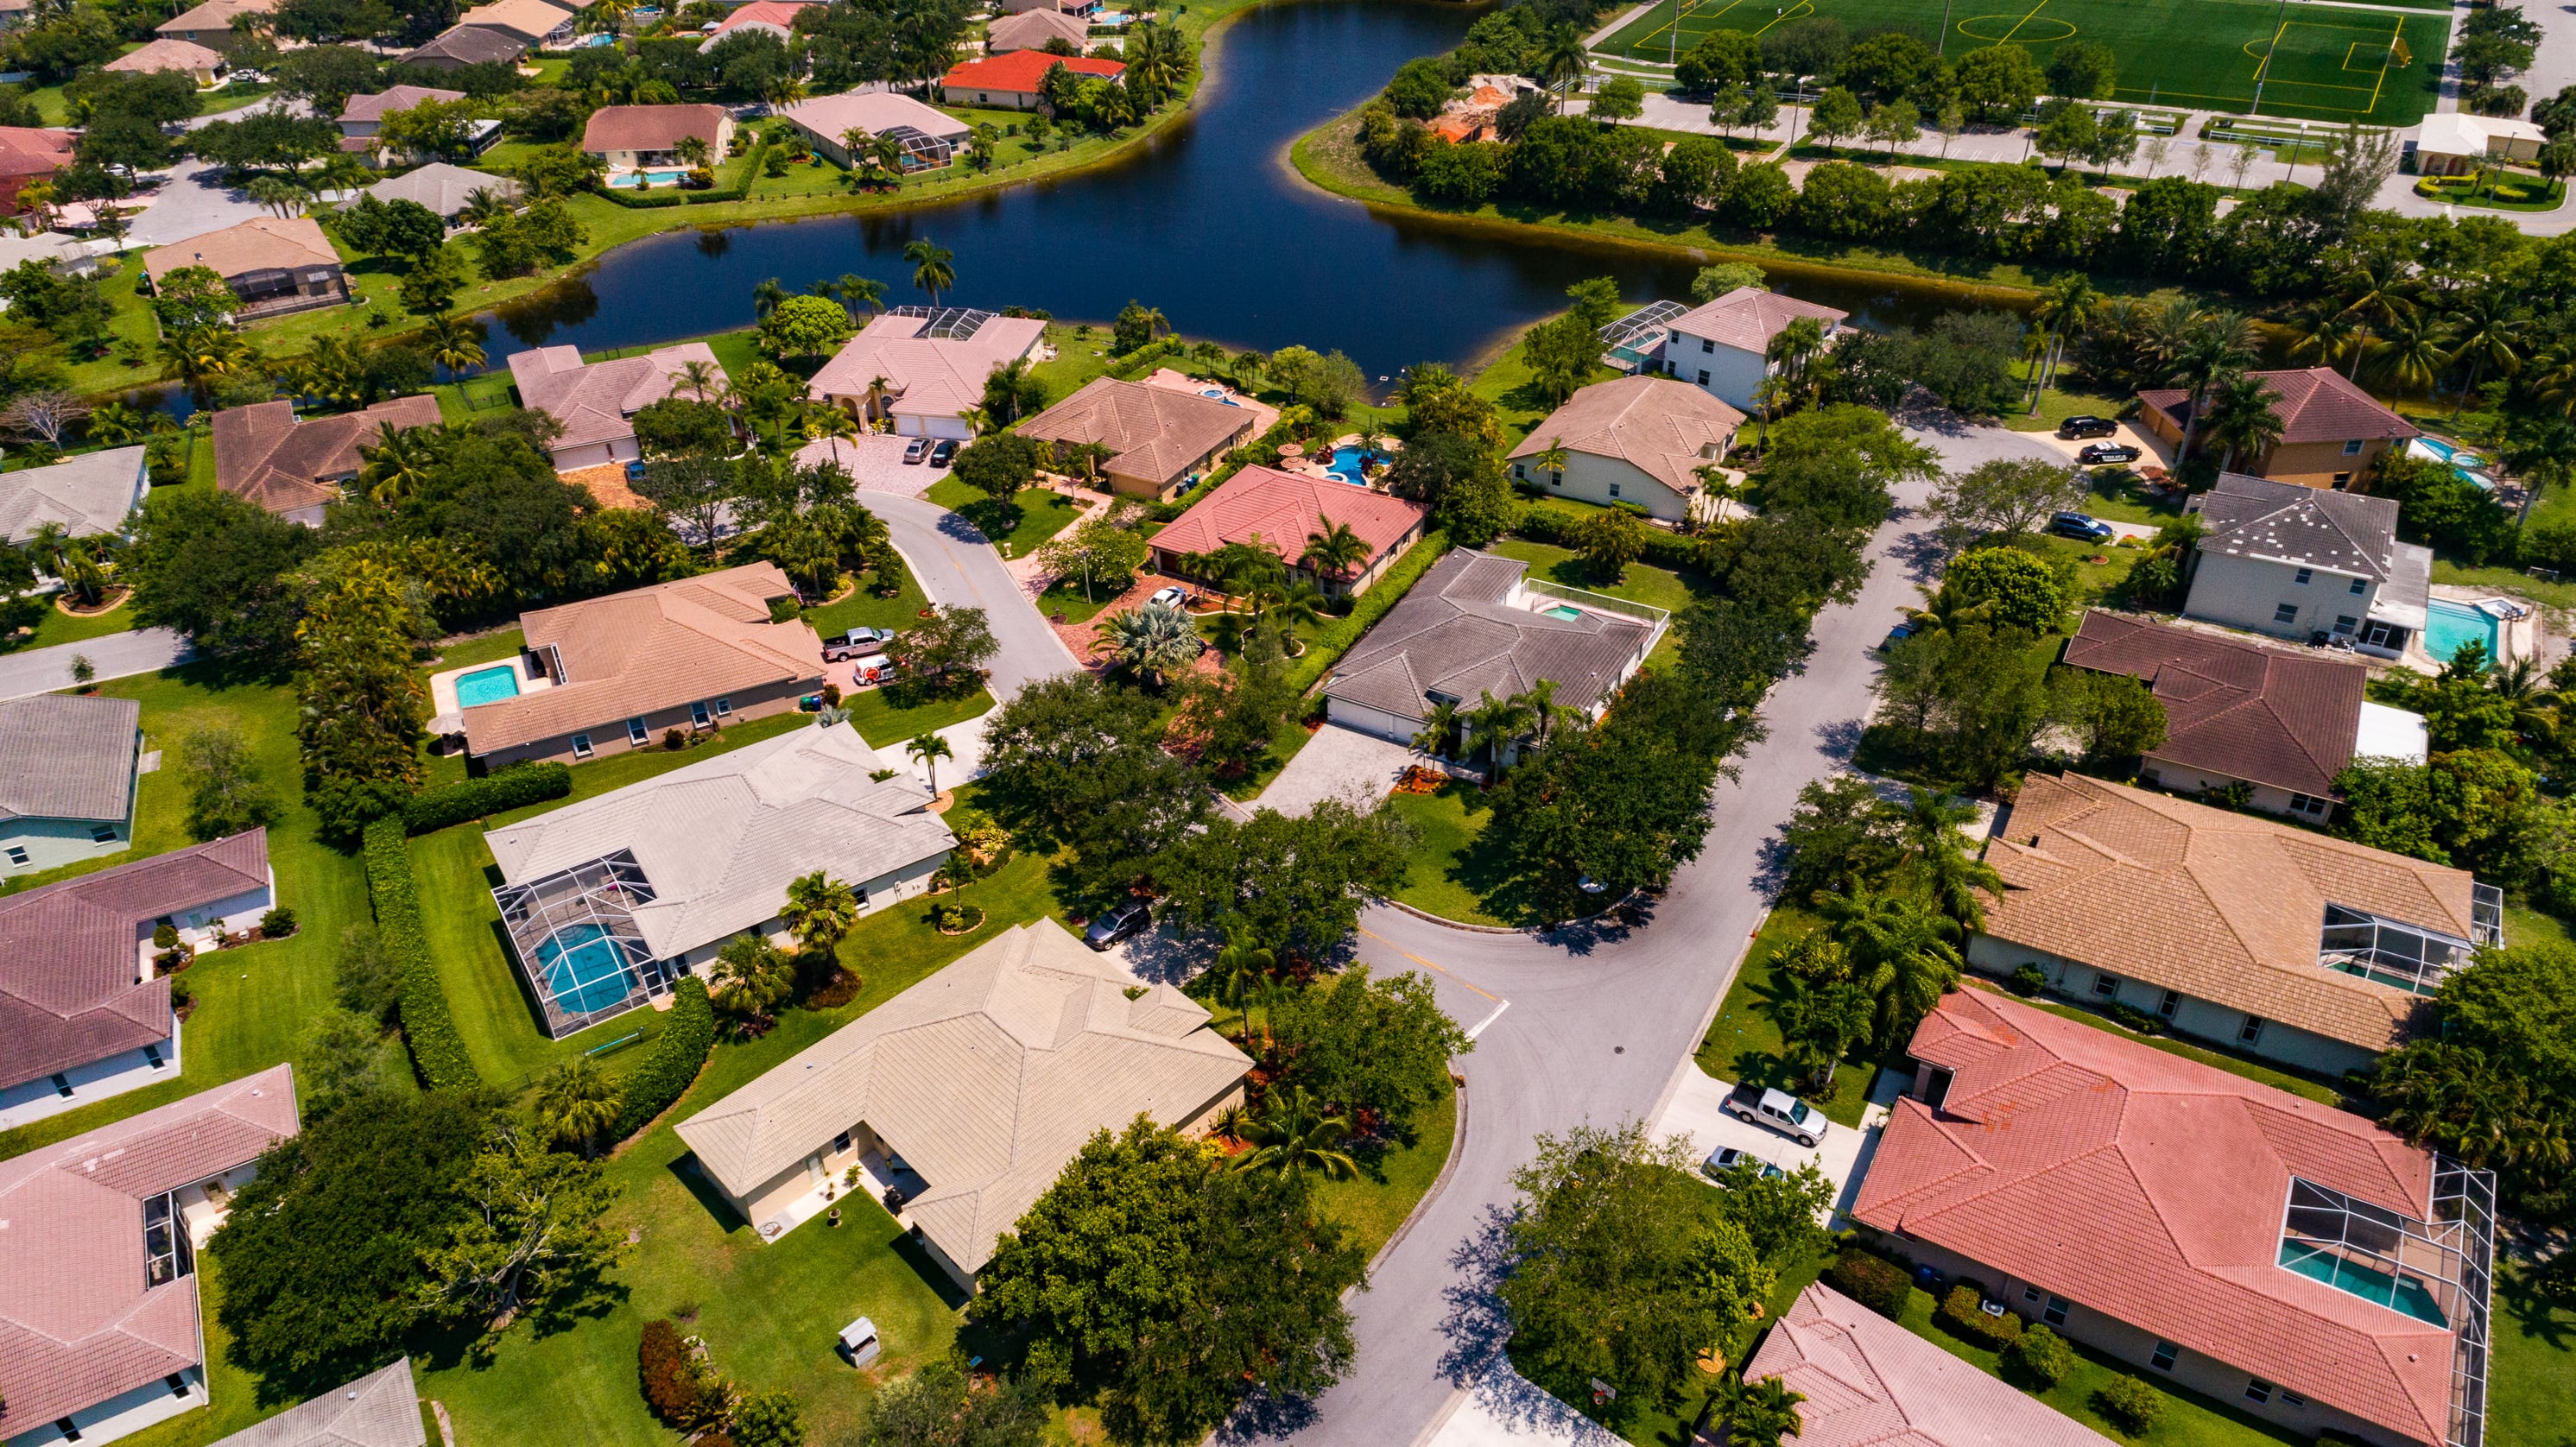 A low-lying suburb in Florida